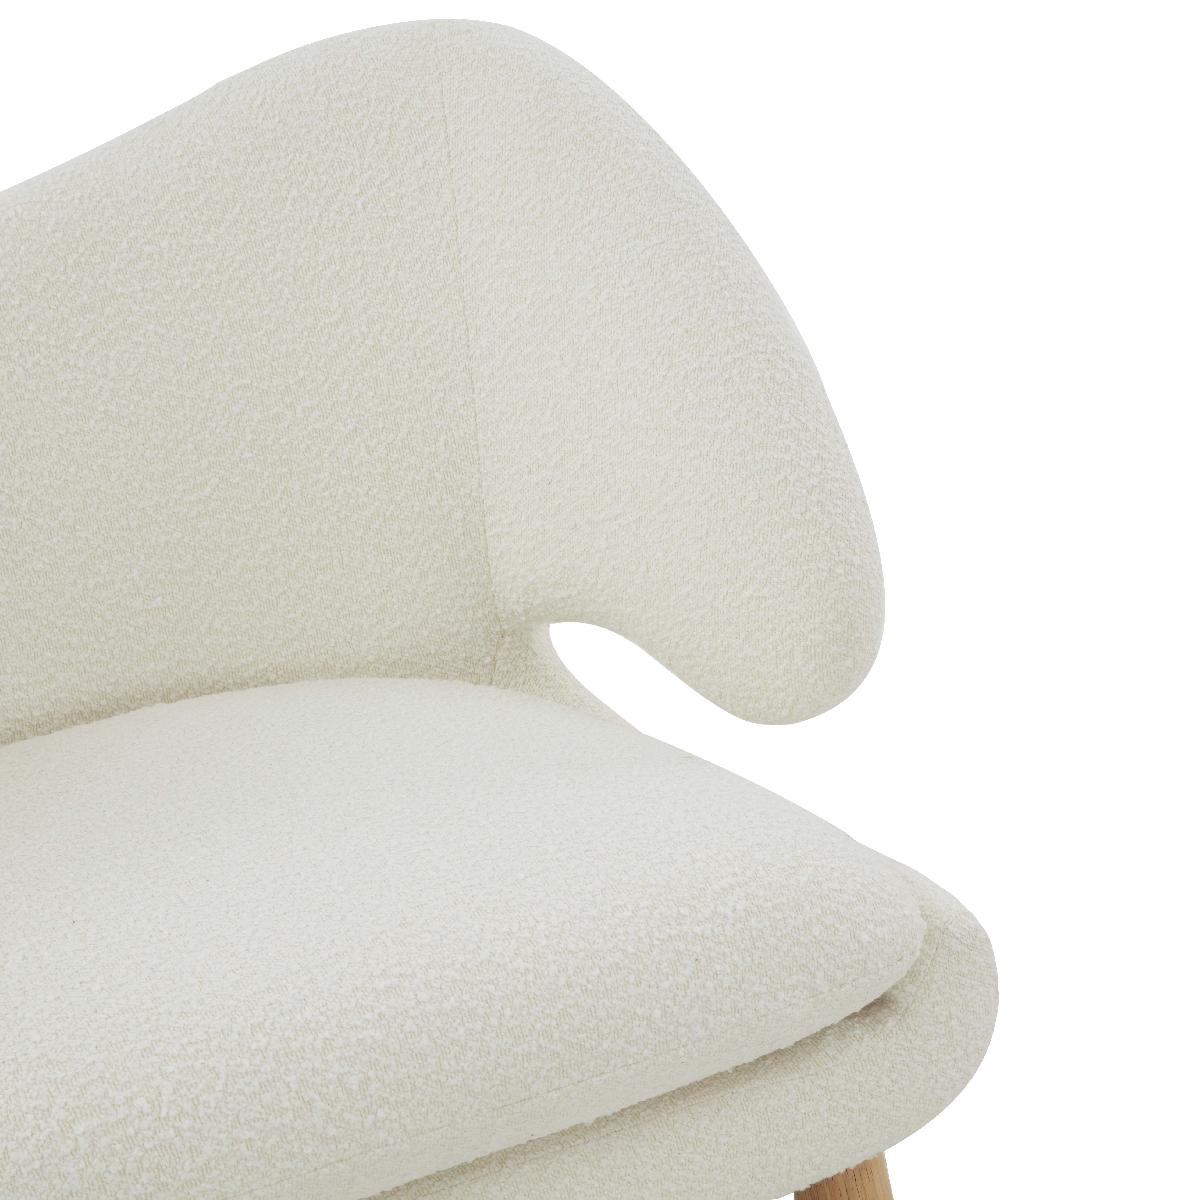 Safavieh Couture Felicia Contemporary Accent Chair - Ivory / Natural